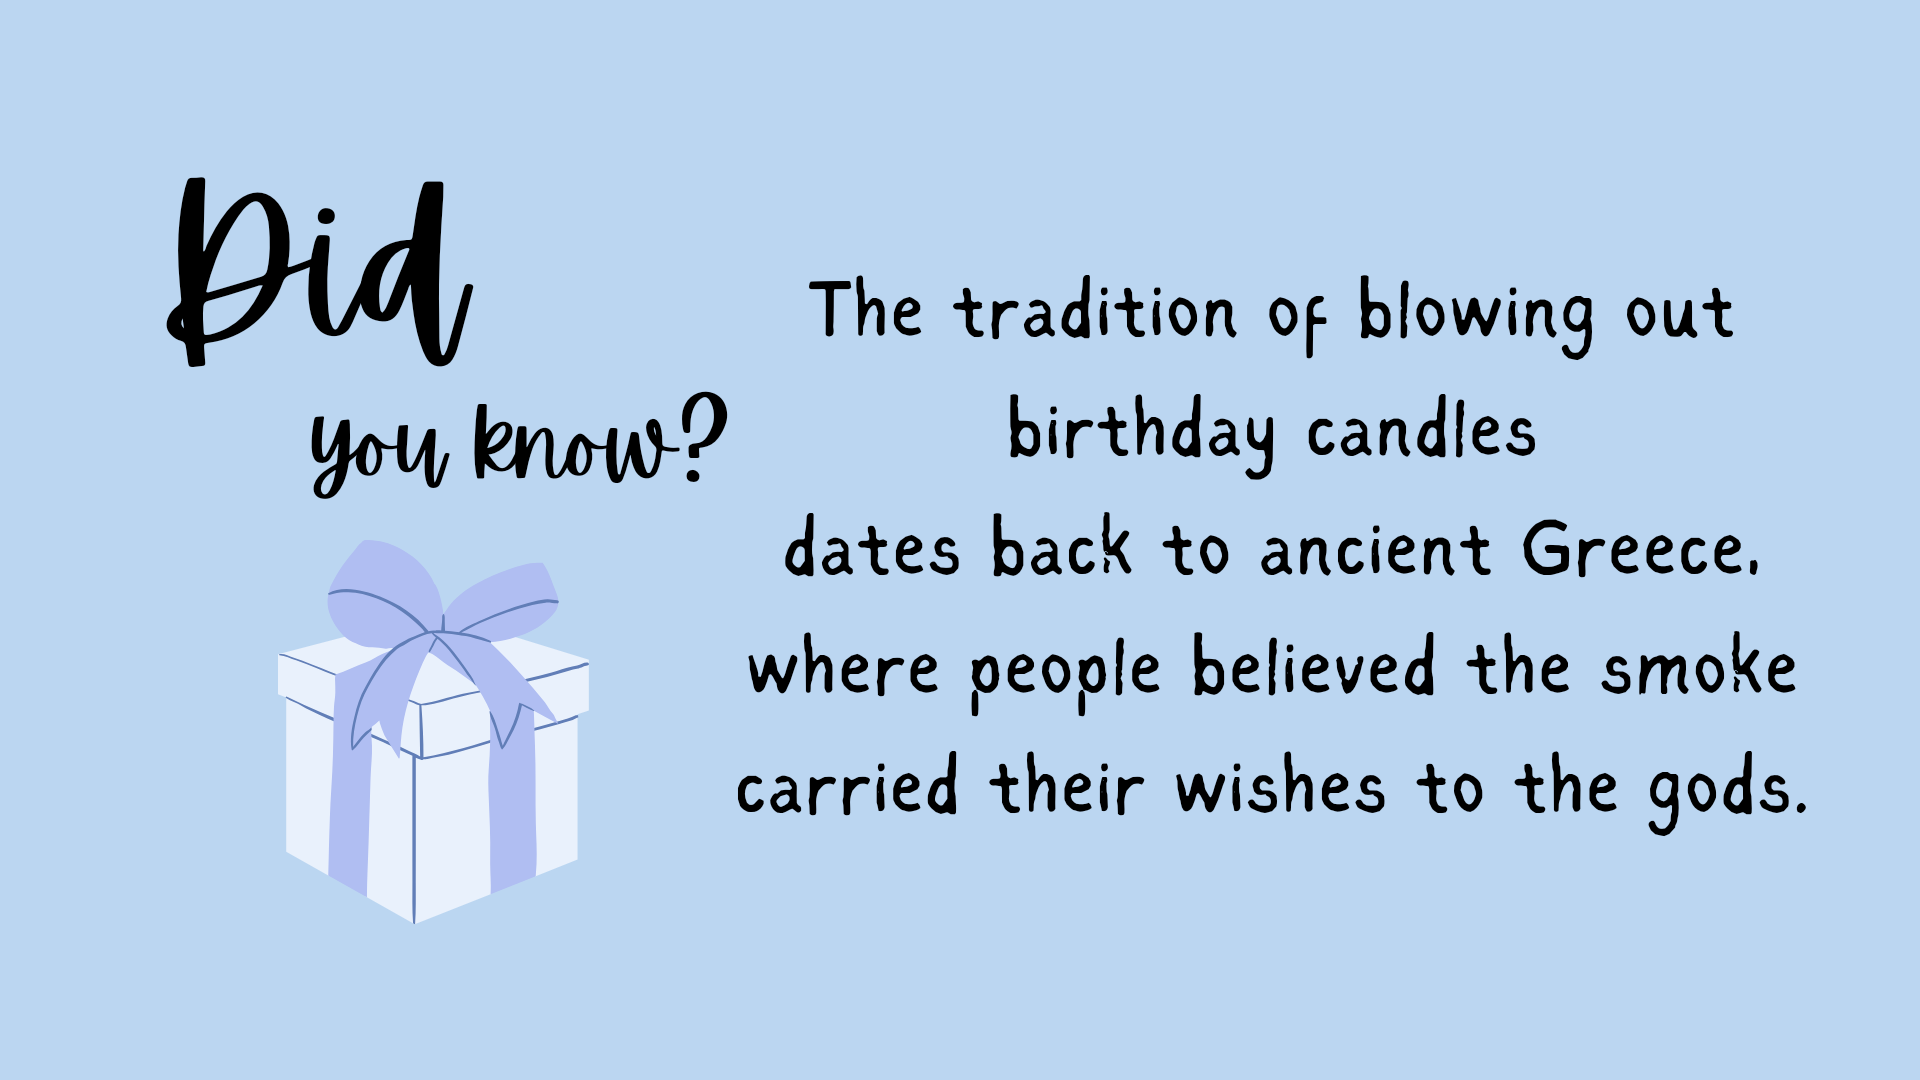 Greek tradition of blowing out birthday candles to send wishes to God.